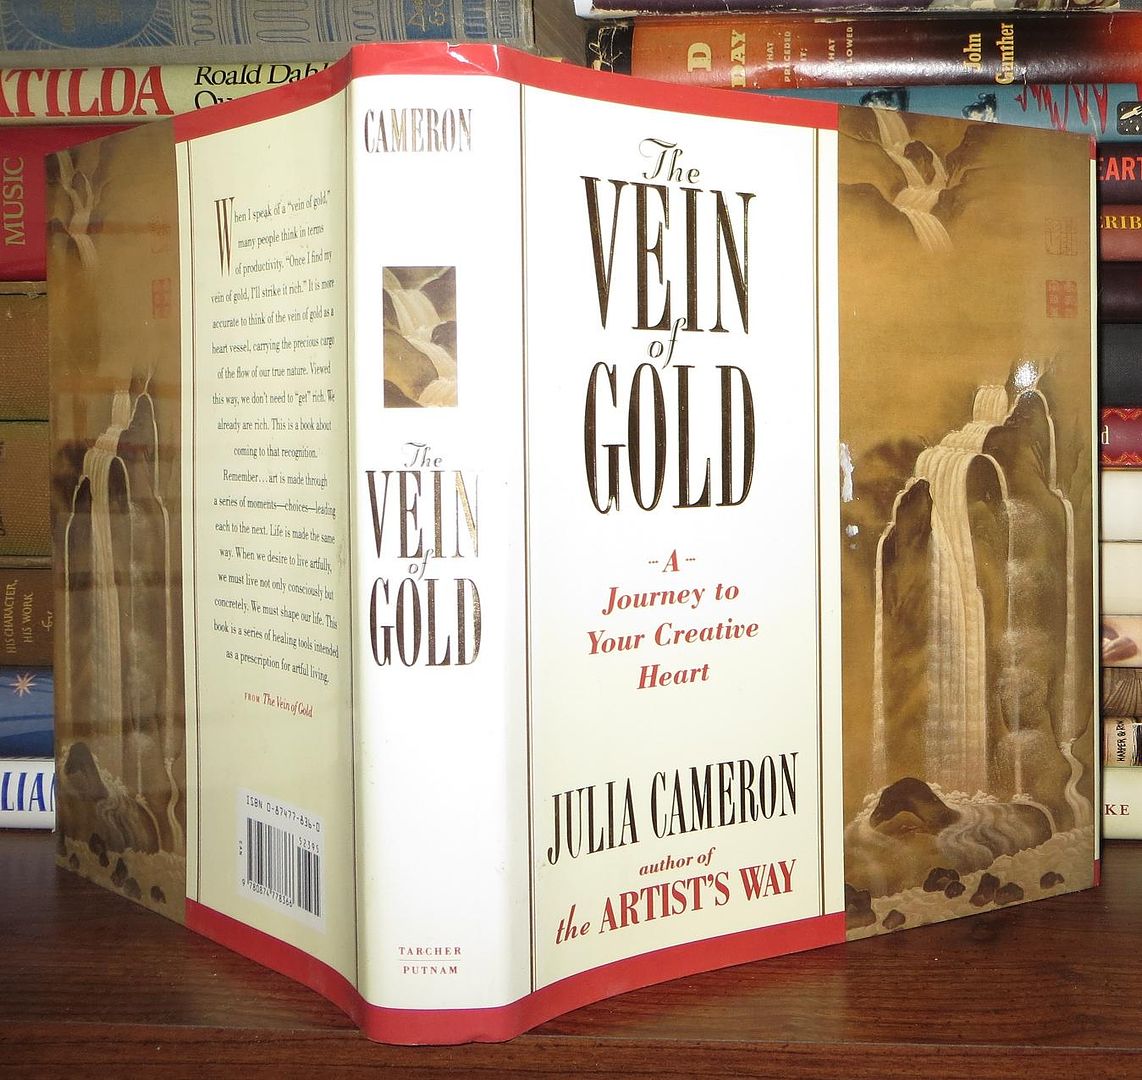 CAMERON, JULIA - The Vein of Gold a Journey to Your Creative Heart